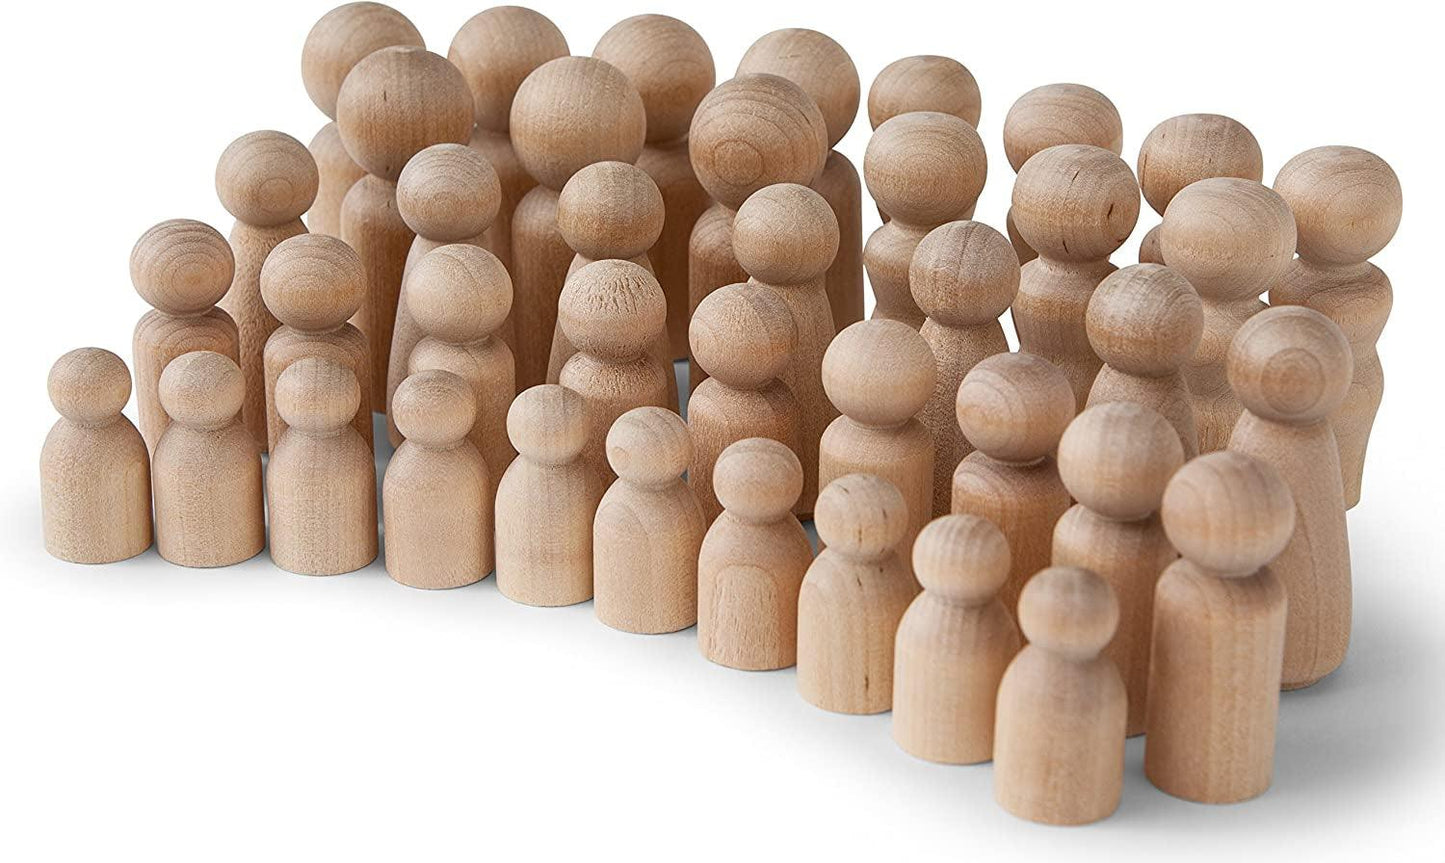 Natural Unfinished Wooden Peg Doll Bodies, Quality People Shapes, Great for Arts and Crafts Set of 40 in 5 Shapes and Sizes - WoodArtSupply